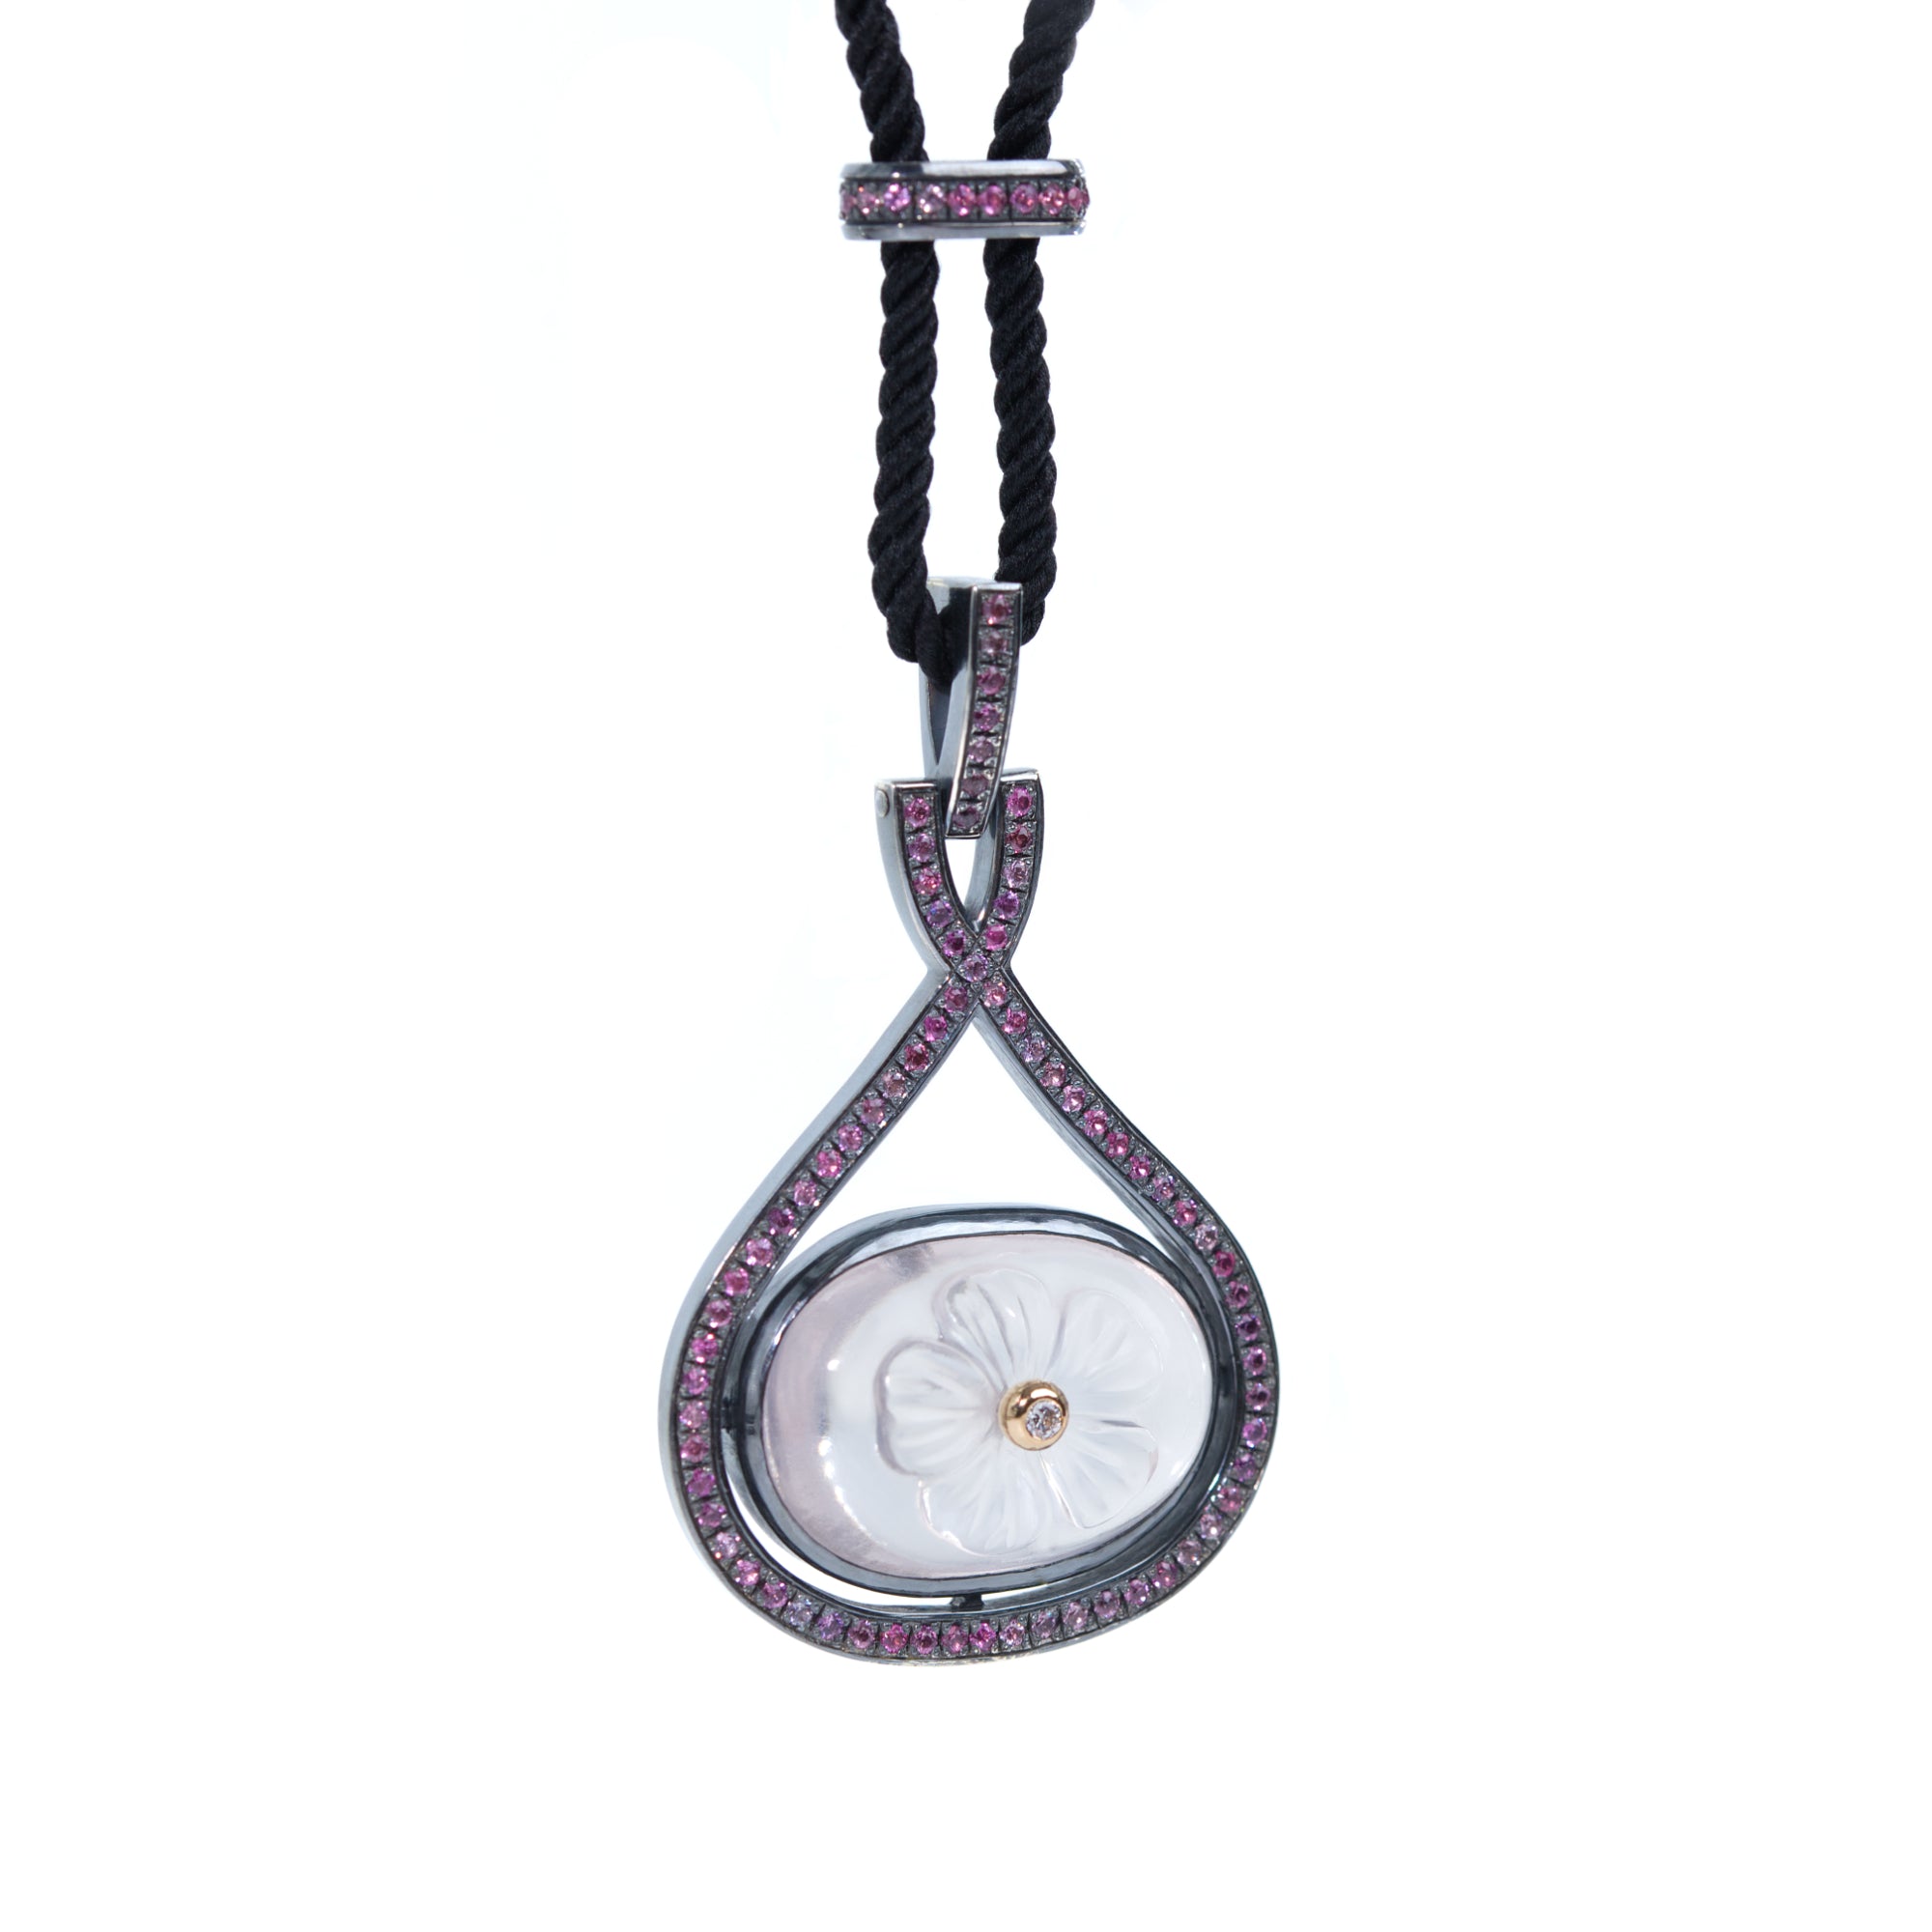 A necklace featuring carved rose quartz adorned with white diamond hangs from black rope.  The necklace is presented on white background.  